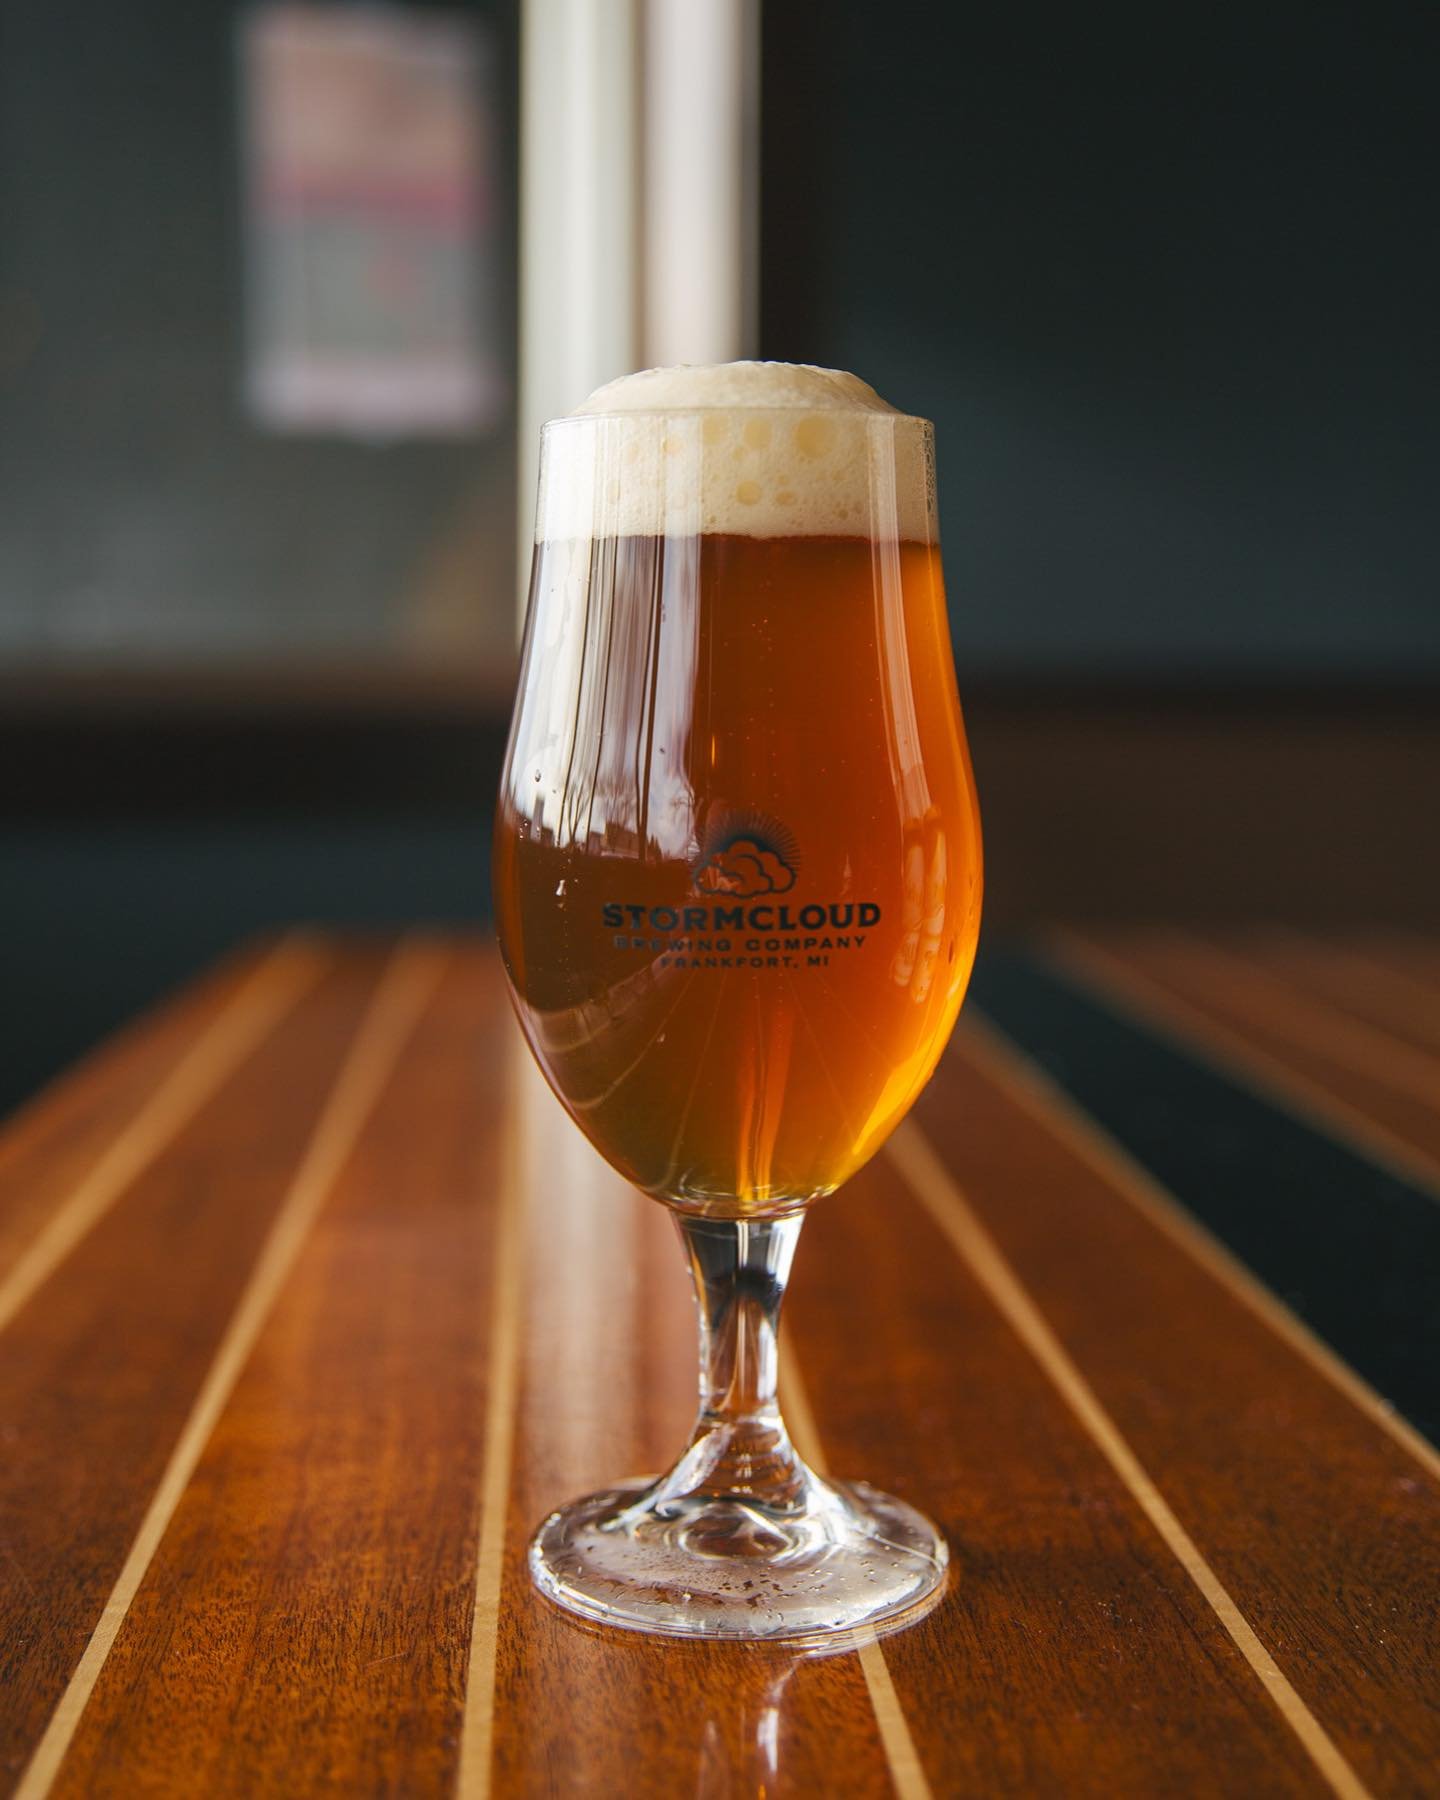 Starting off American Craft Beer Week with our award winning Belgian-style Pale Ale. Rainmaker Ale is malty, copper in color with a low hop aroma &amp; flavor. This beer was awarded a silver medal in the 2023 Brussels Beer Challenge, a gold medal in 